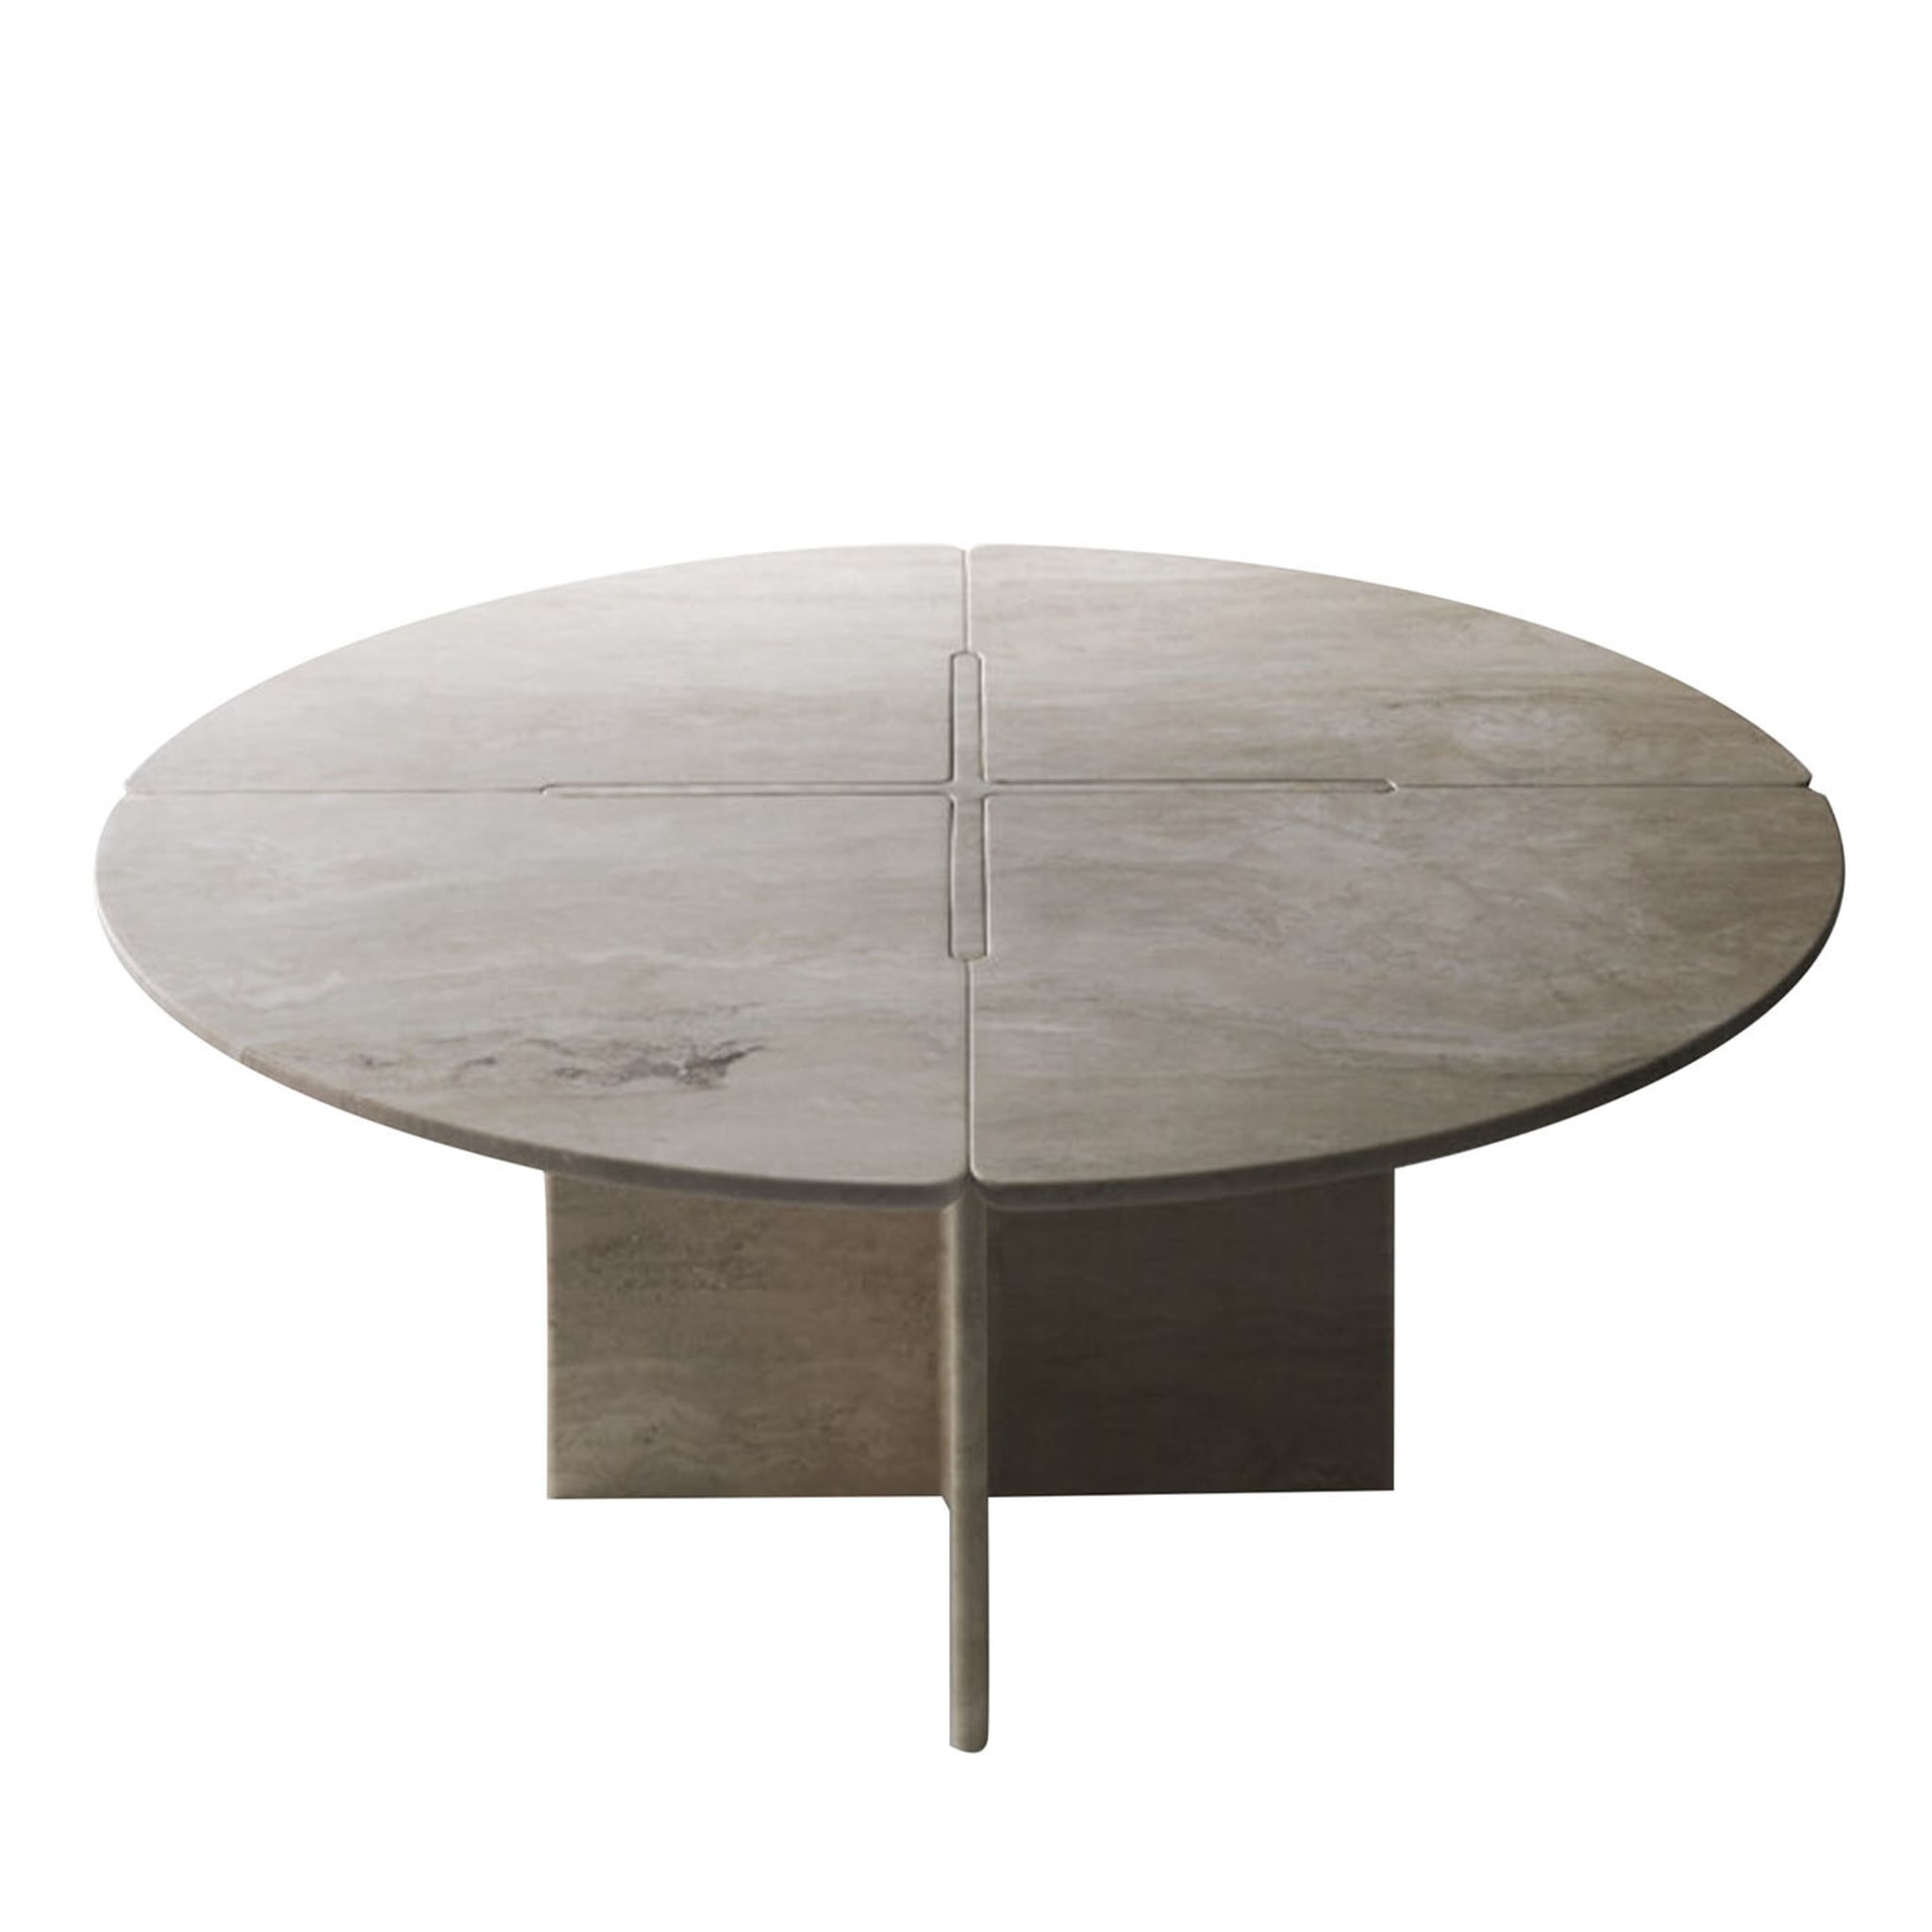 More Round Dining Table by Marco Spatti - Main view